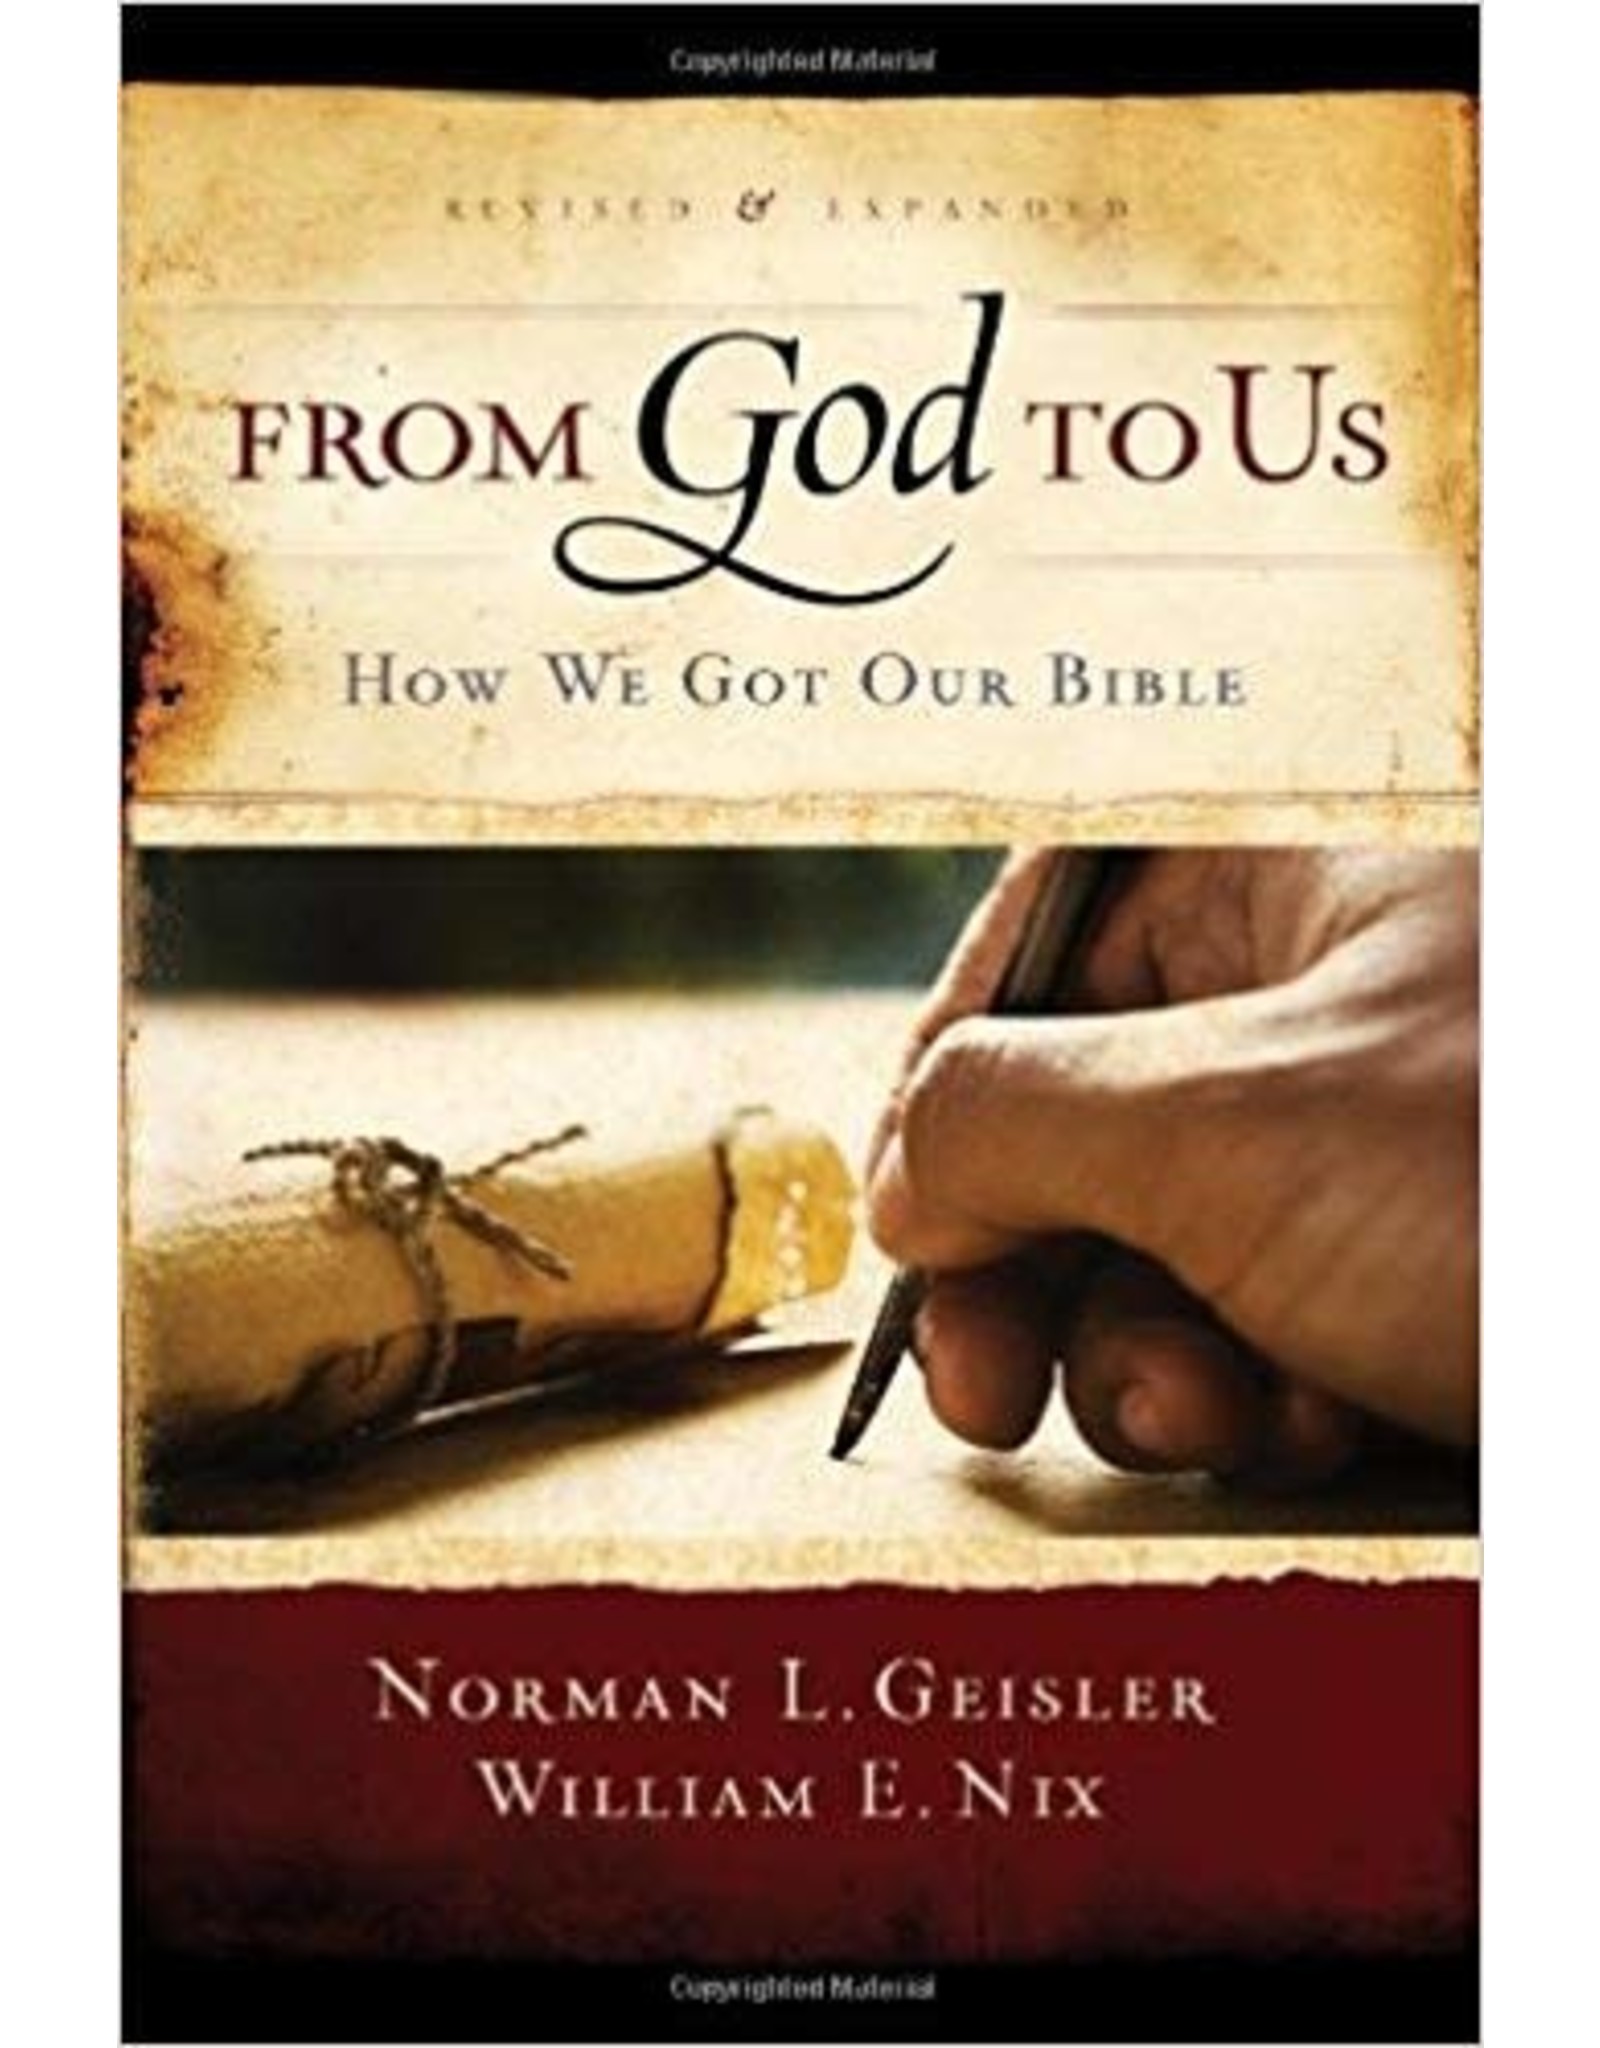 Norman L Geisler From God to Us How we Got the Bible